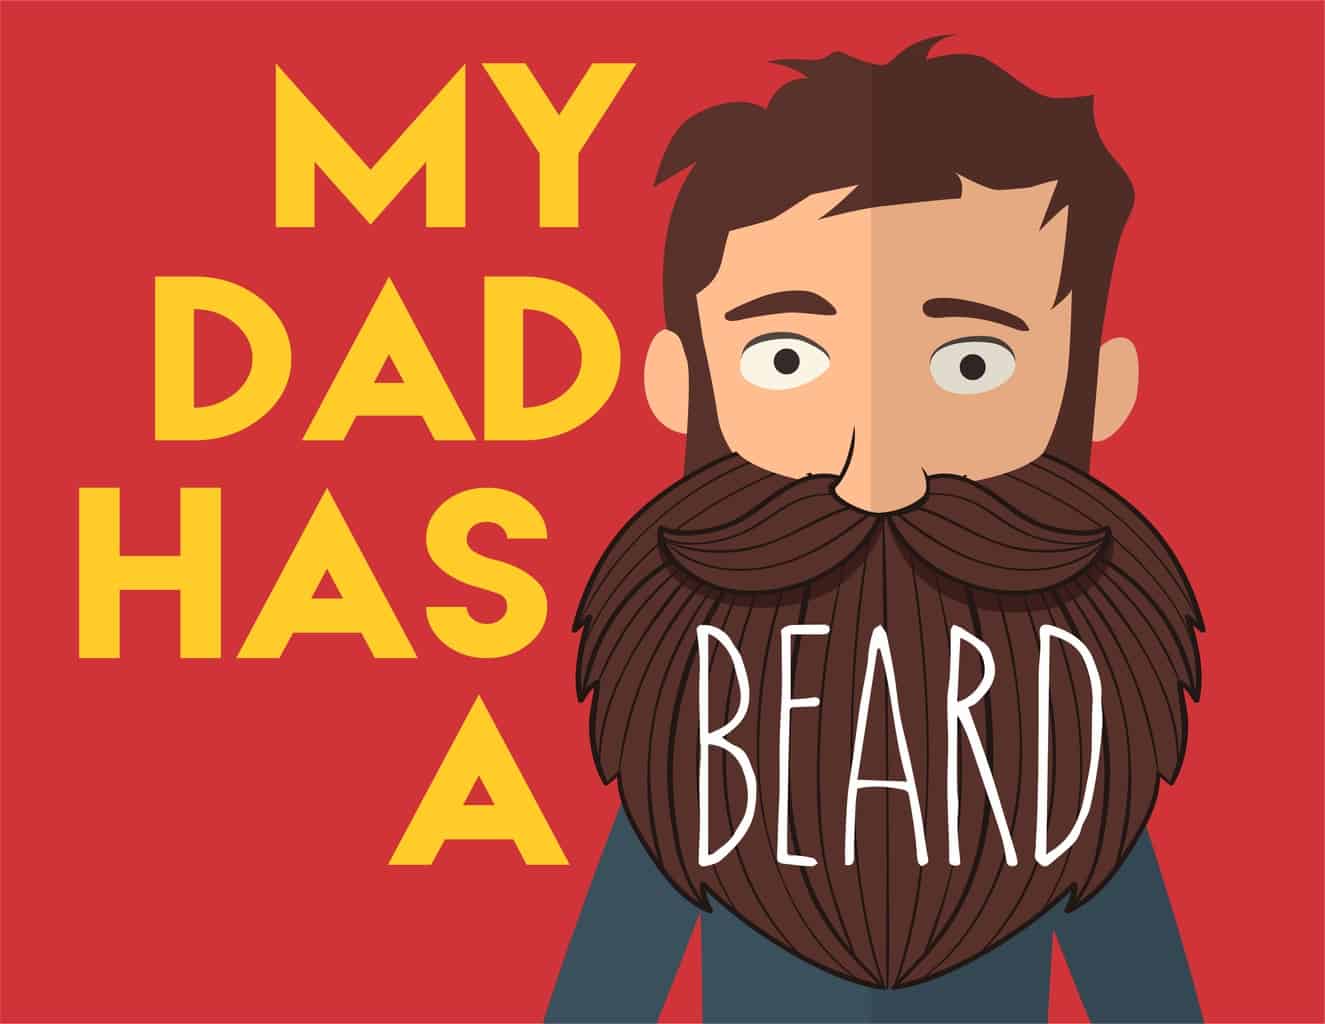 Books for Bearded Dads!